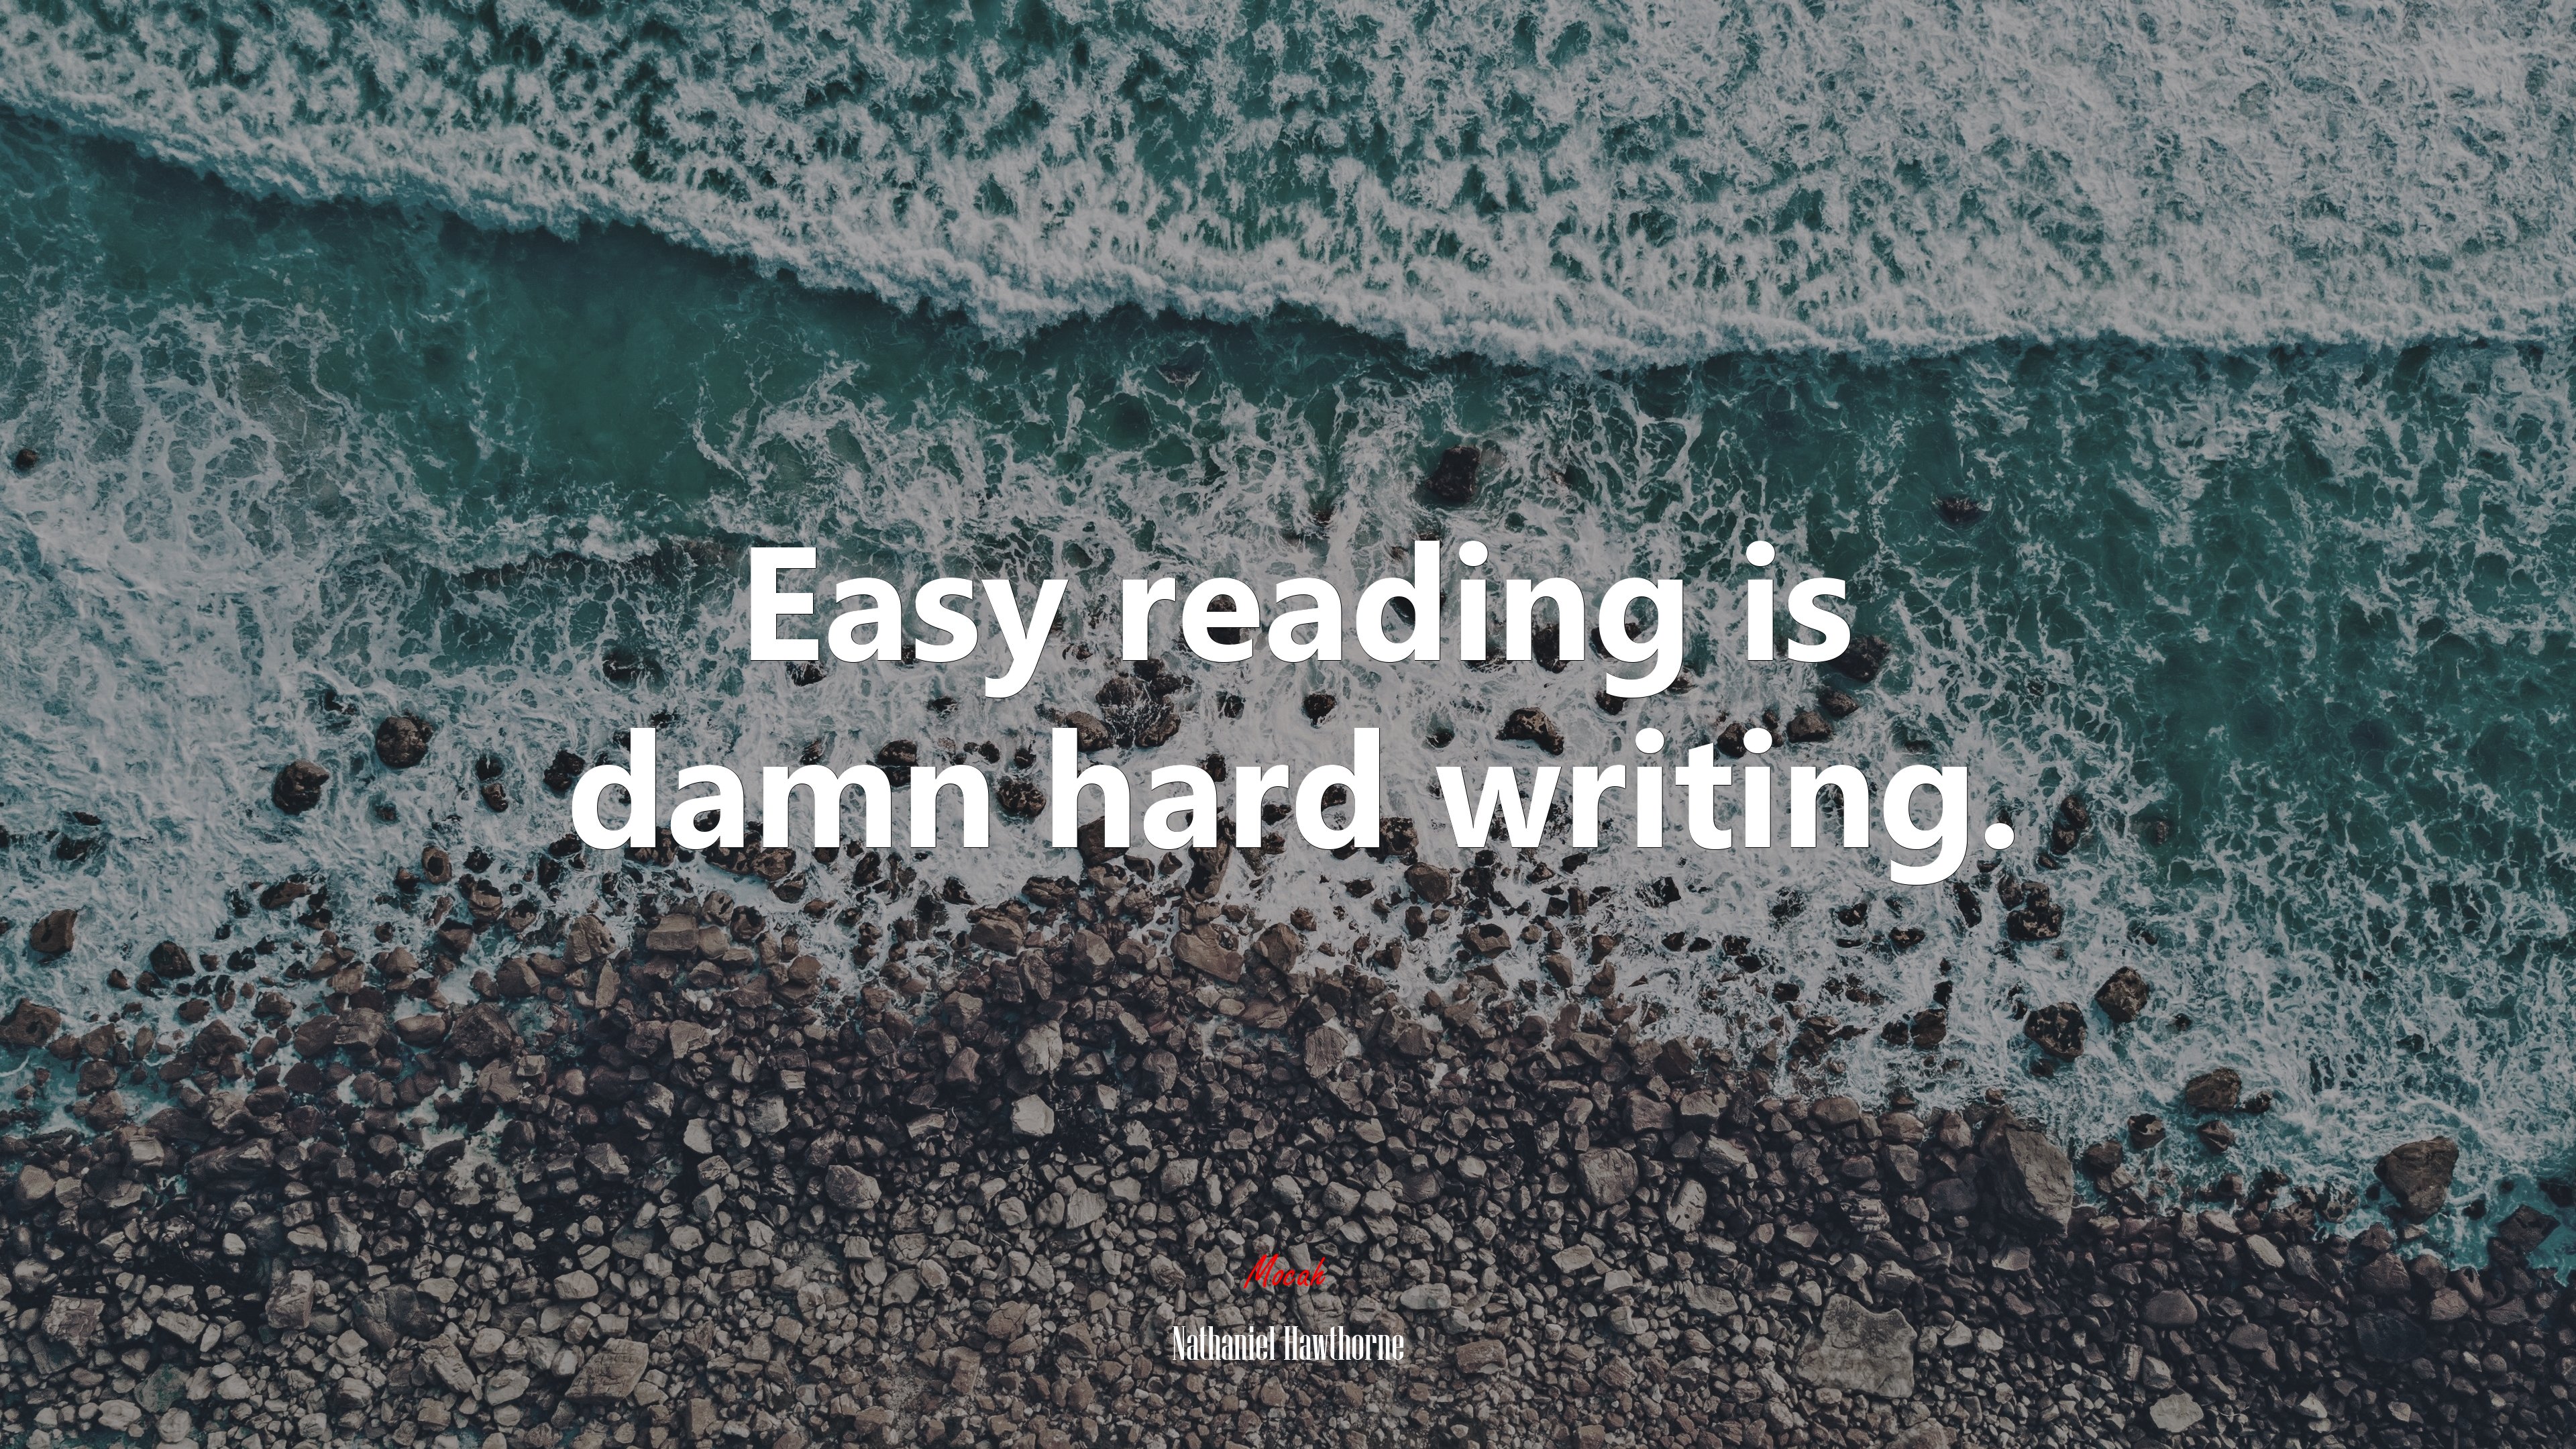 Easy reading is damn hard writing. Nathaniel Hawthorne quote Gallery HD Wallpaper